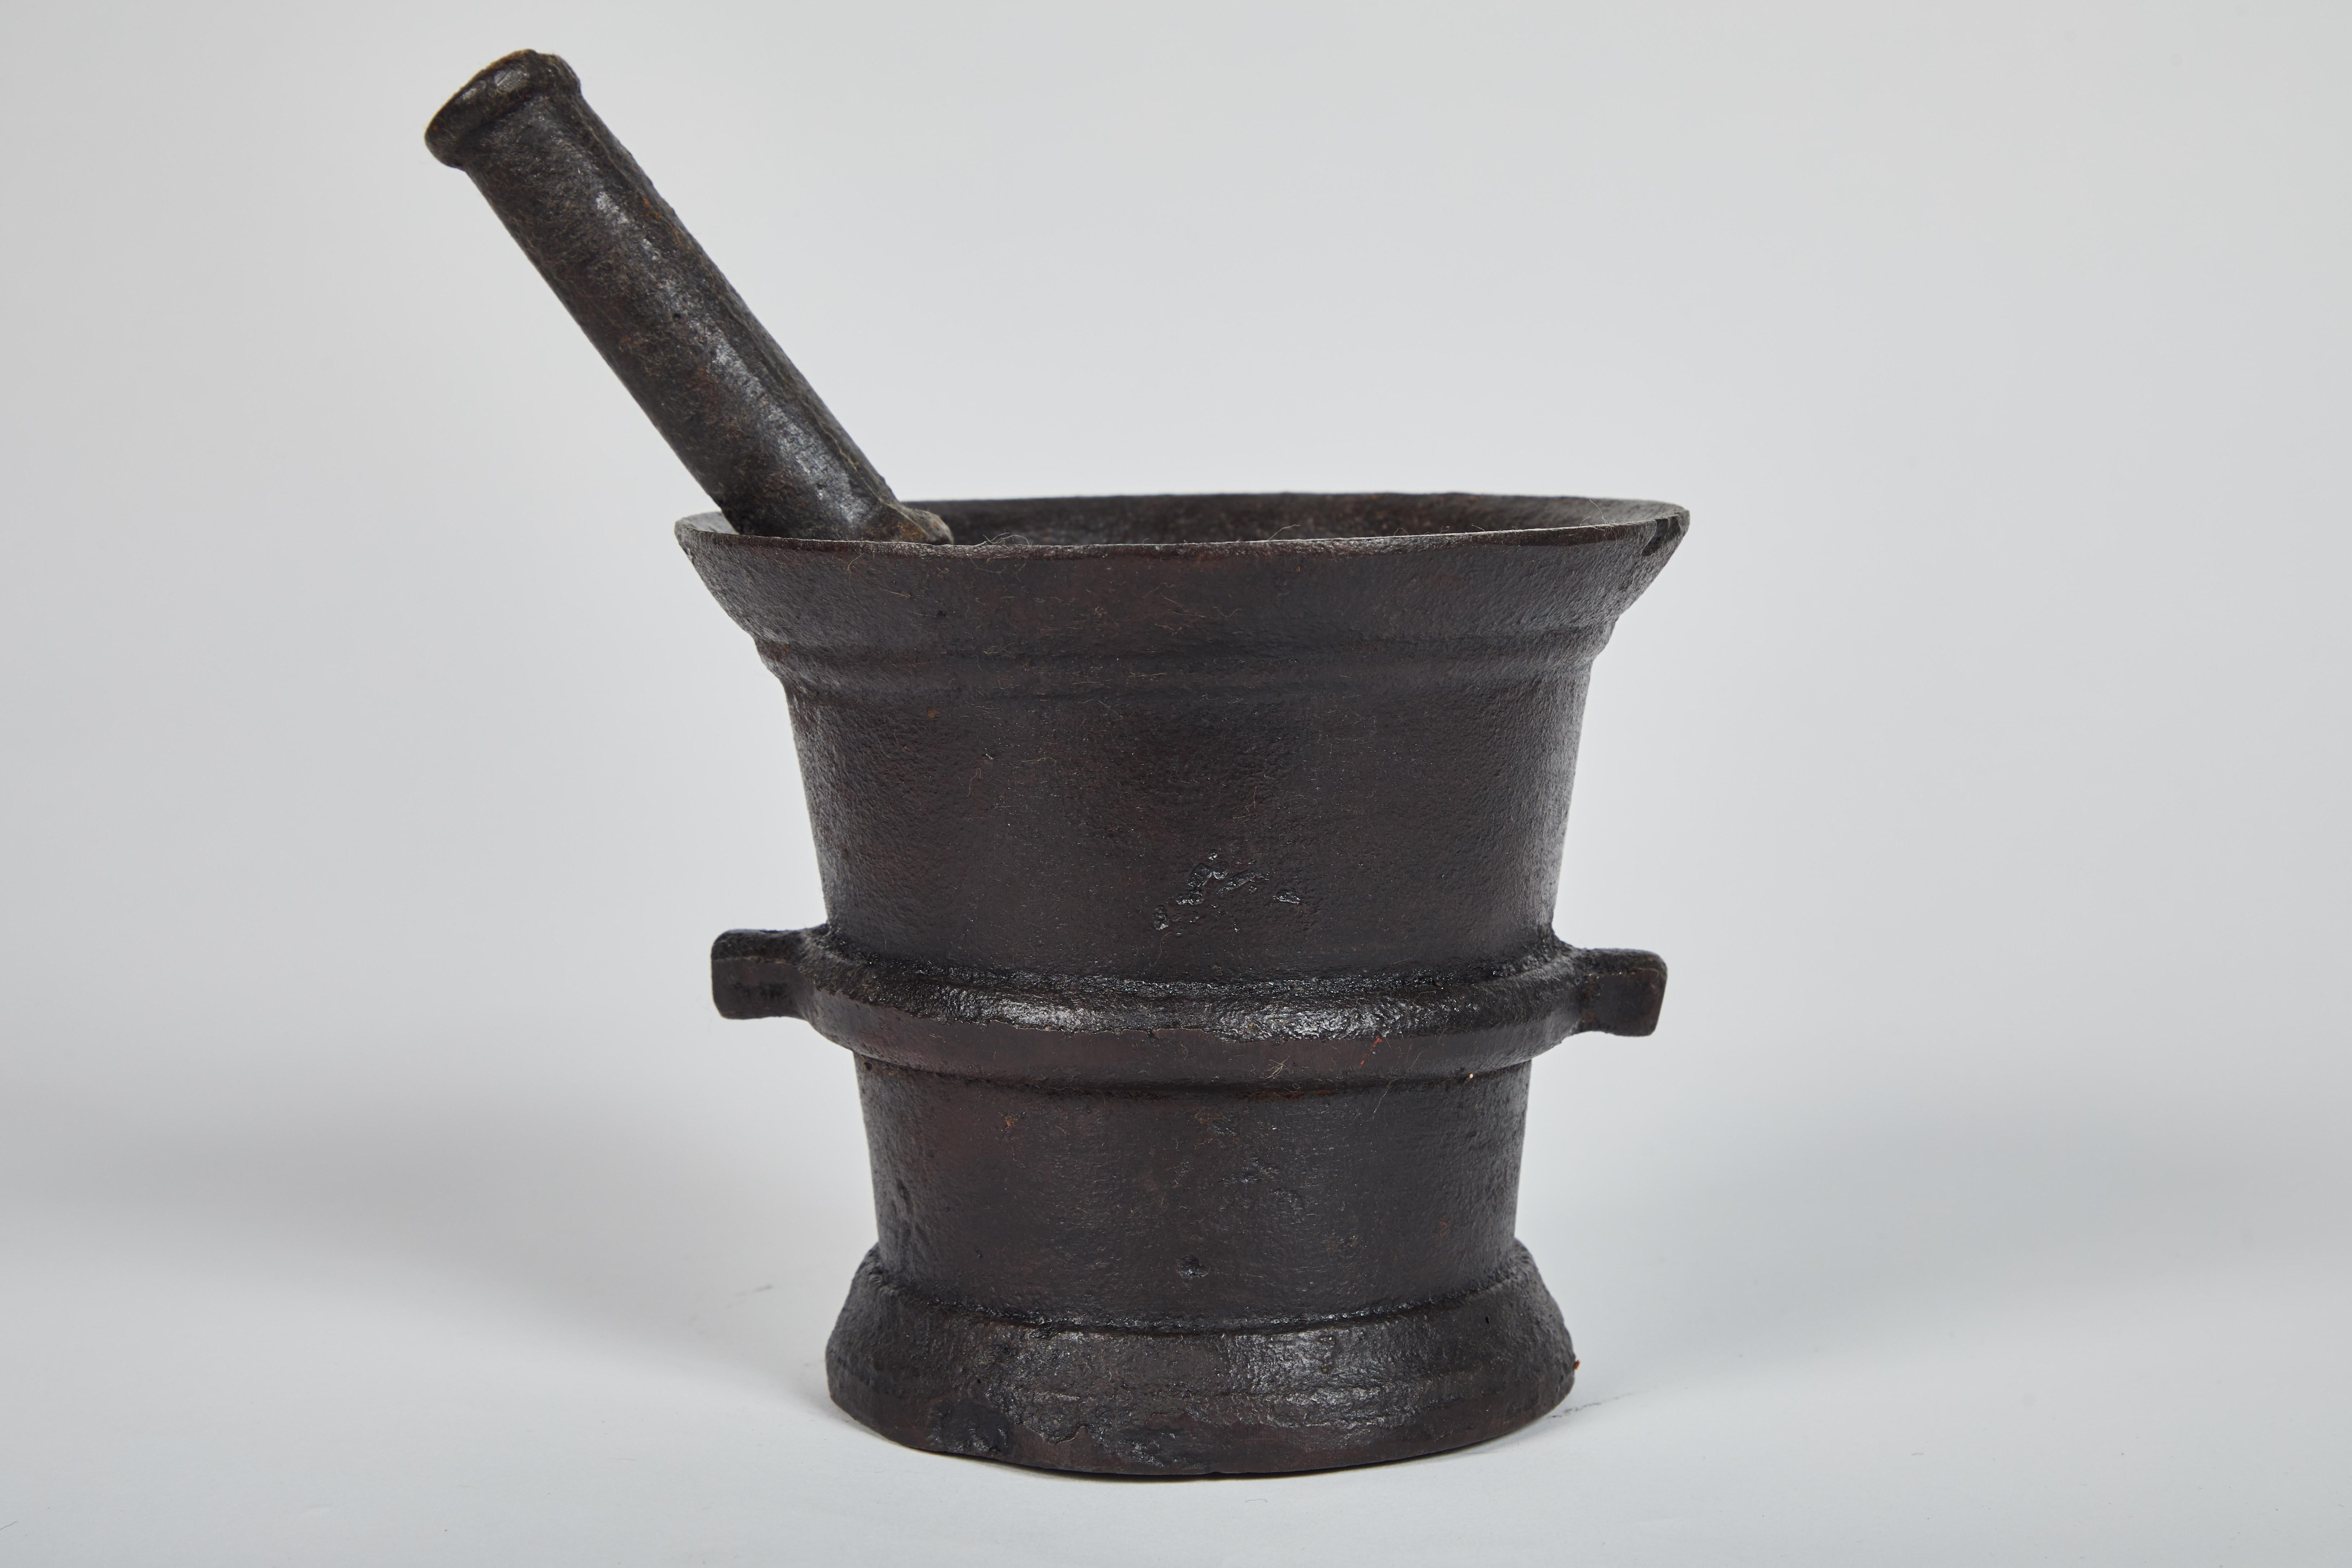 indonesian pestle and mortar